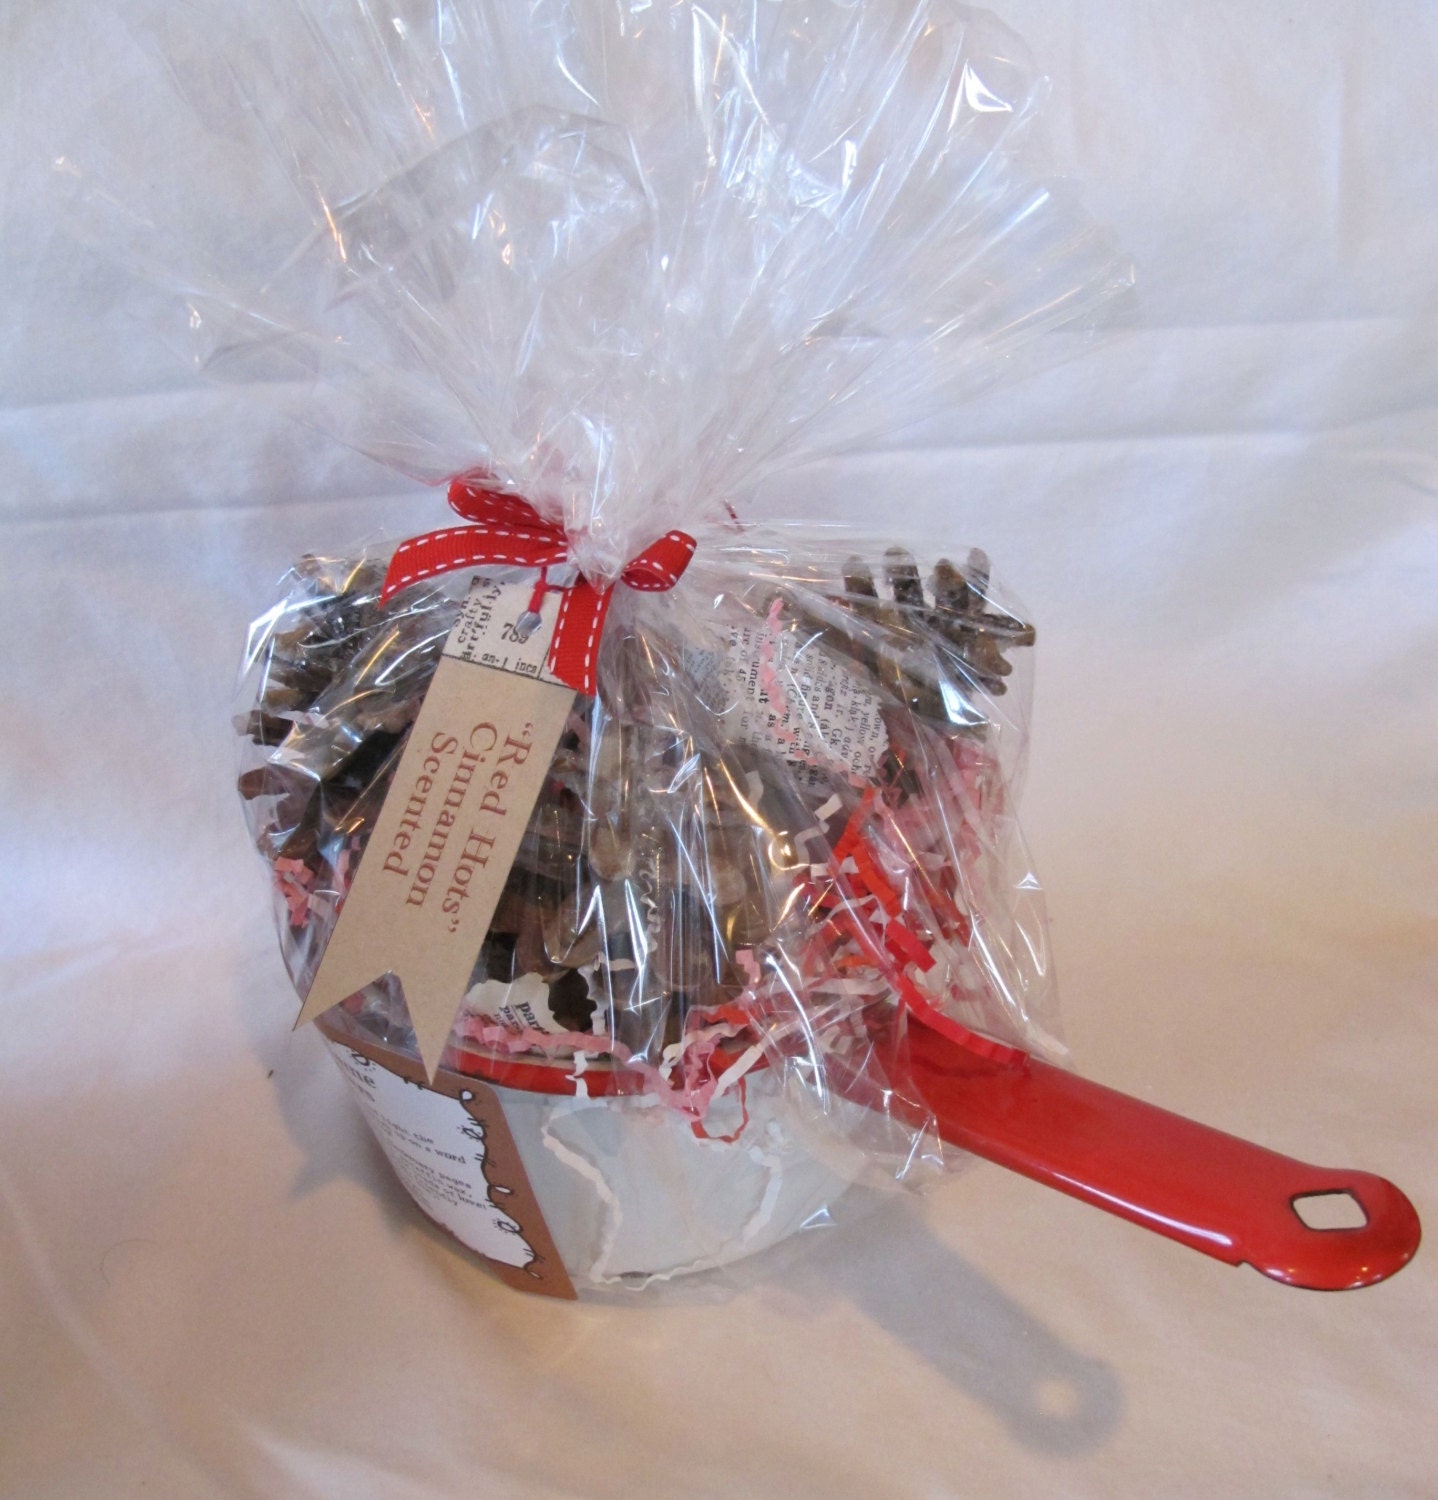 Define Flame, Handmade, Pinecone, Fire Starters, Valentines Day, Vintage Enamelware, Gift, Red Hots, Cinnamon Scented